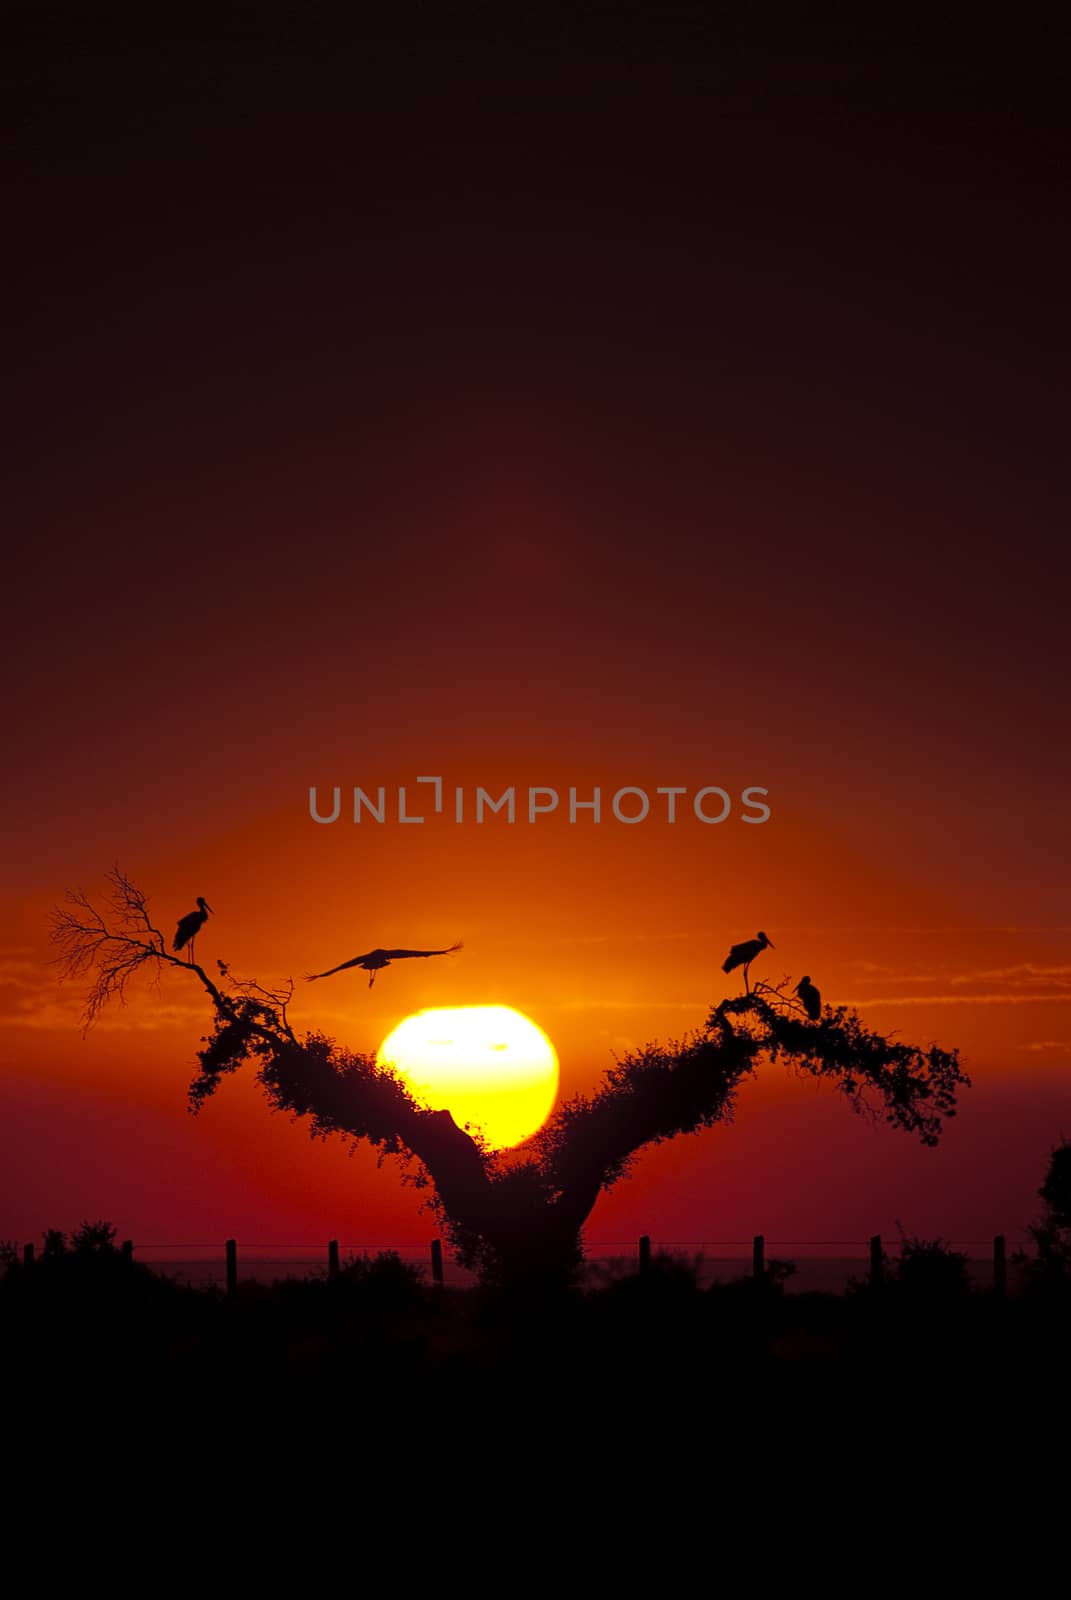 White storks (Ciconia ciconia), perched on an oak at sunset, sil by jalonsohu@gmail.com